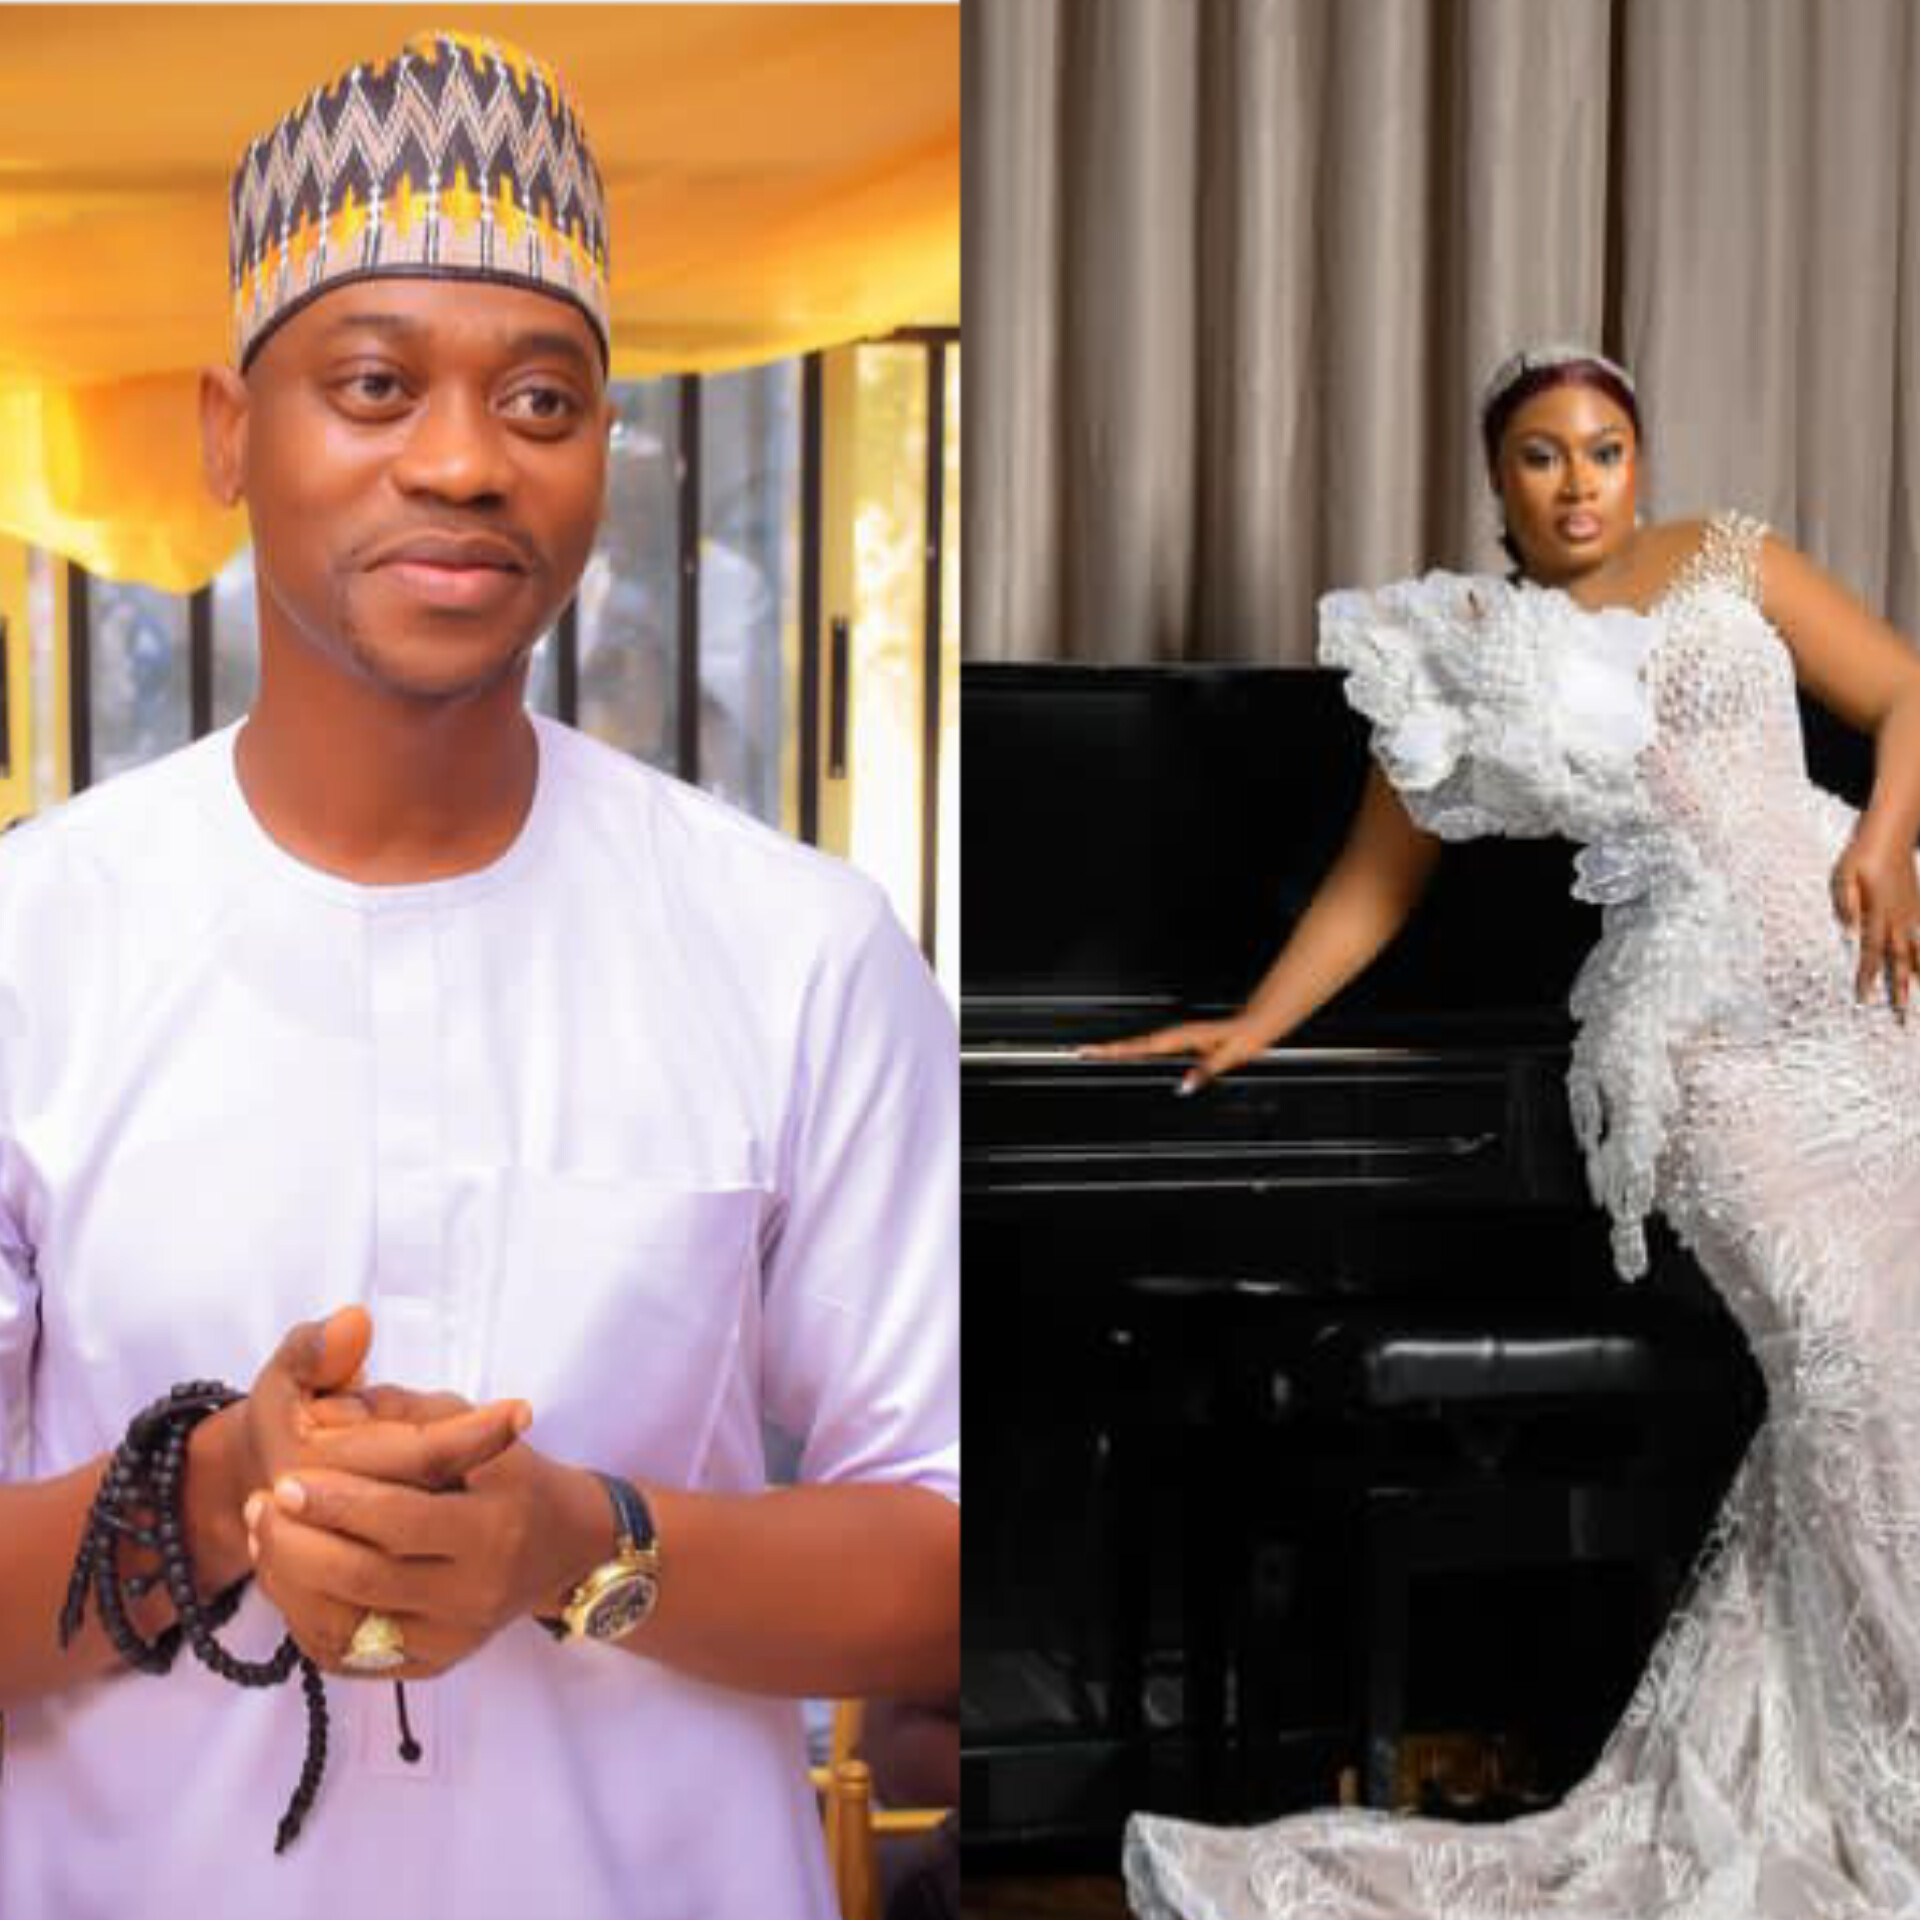 "I'm Proud Of You, I Was Never In Doubt, Of Your Hard Work, Dedication And Professionalism Would Never Go Unnoticed" – Actor Lateef Adedimeji's Wife Celebrates Him As He Gets Nominated For The 10th AMVCA Awards